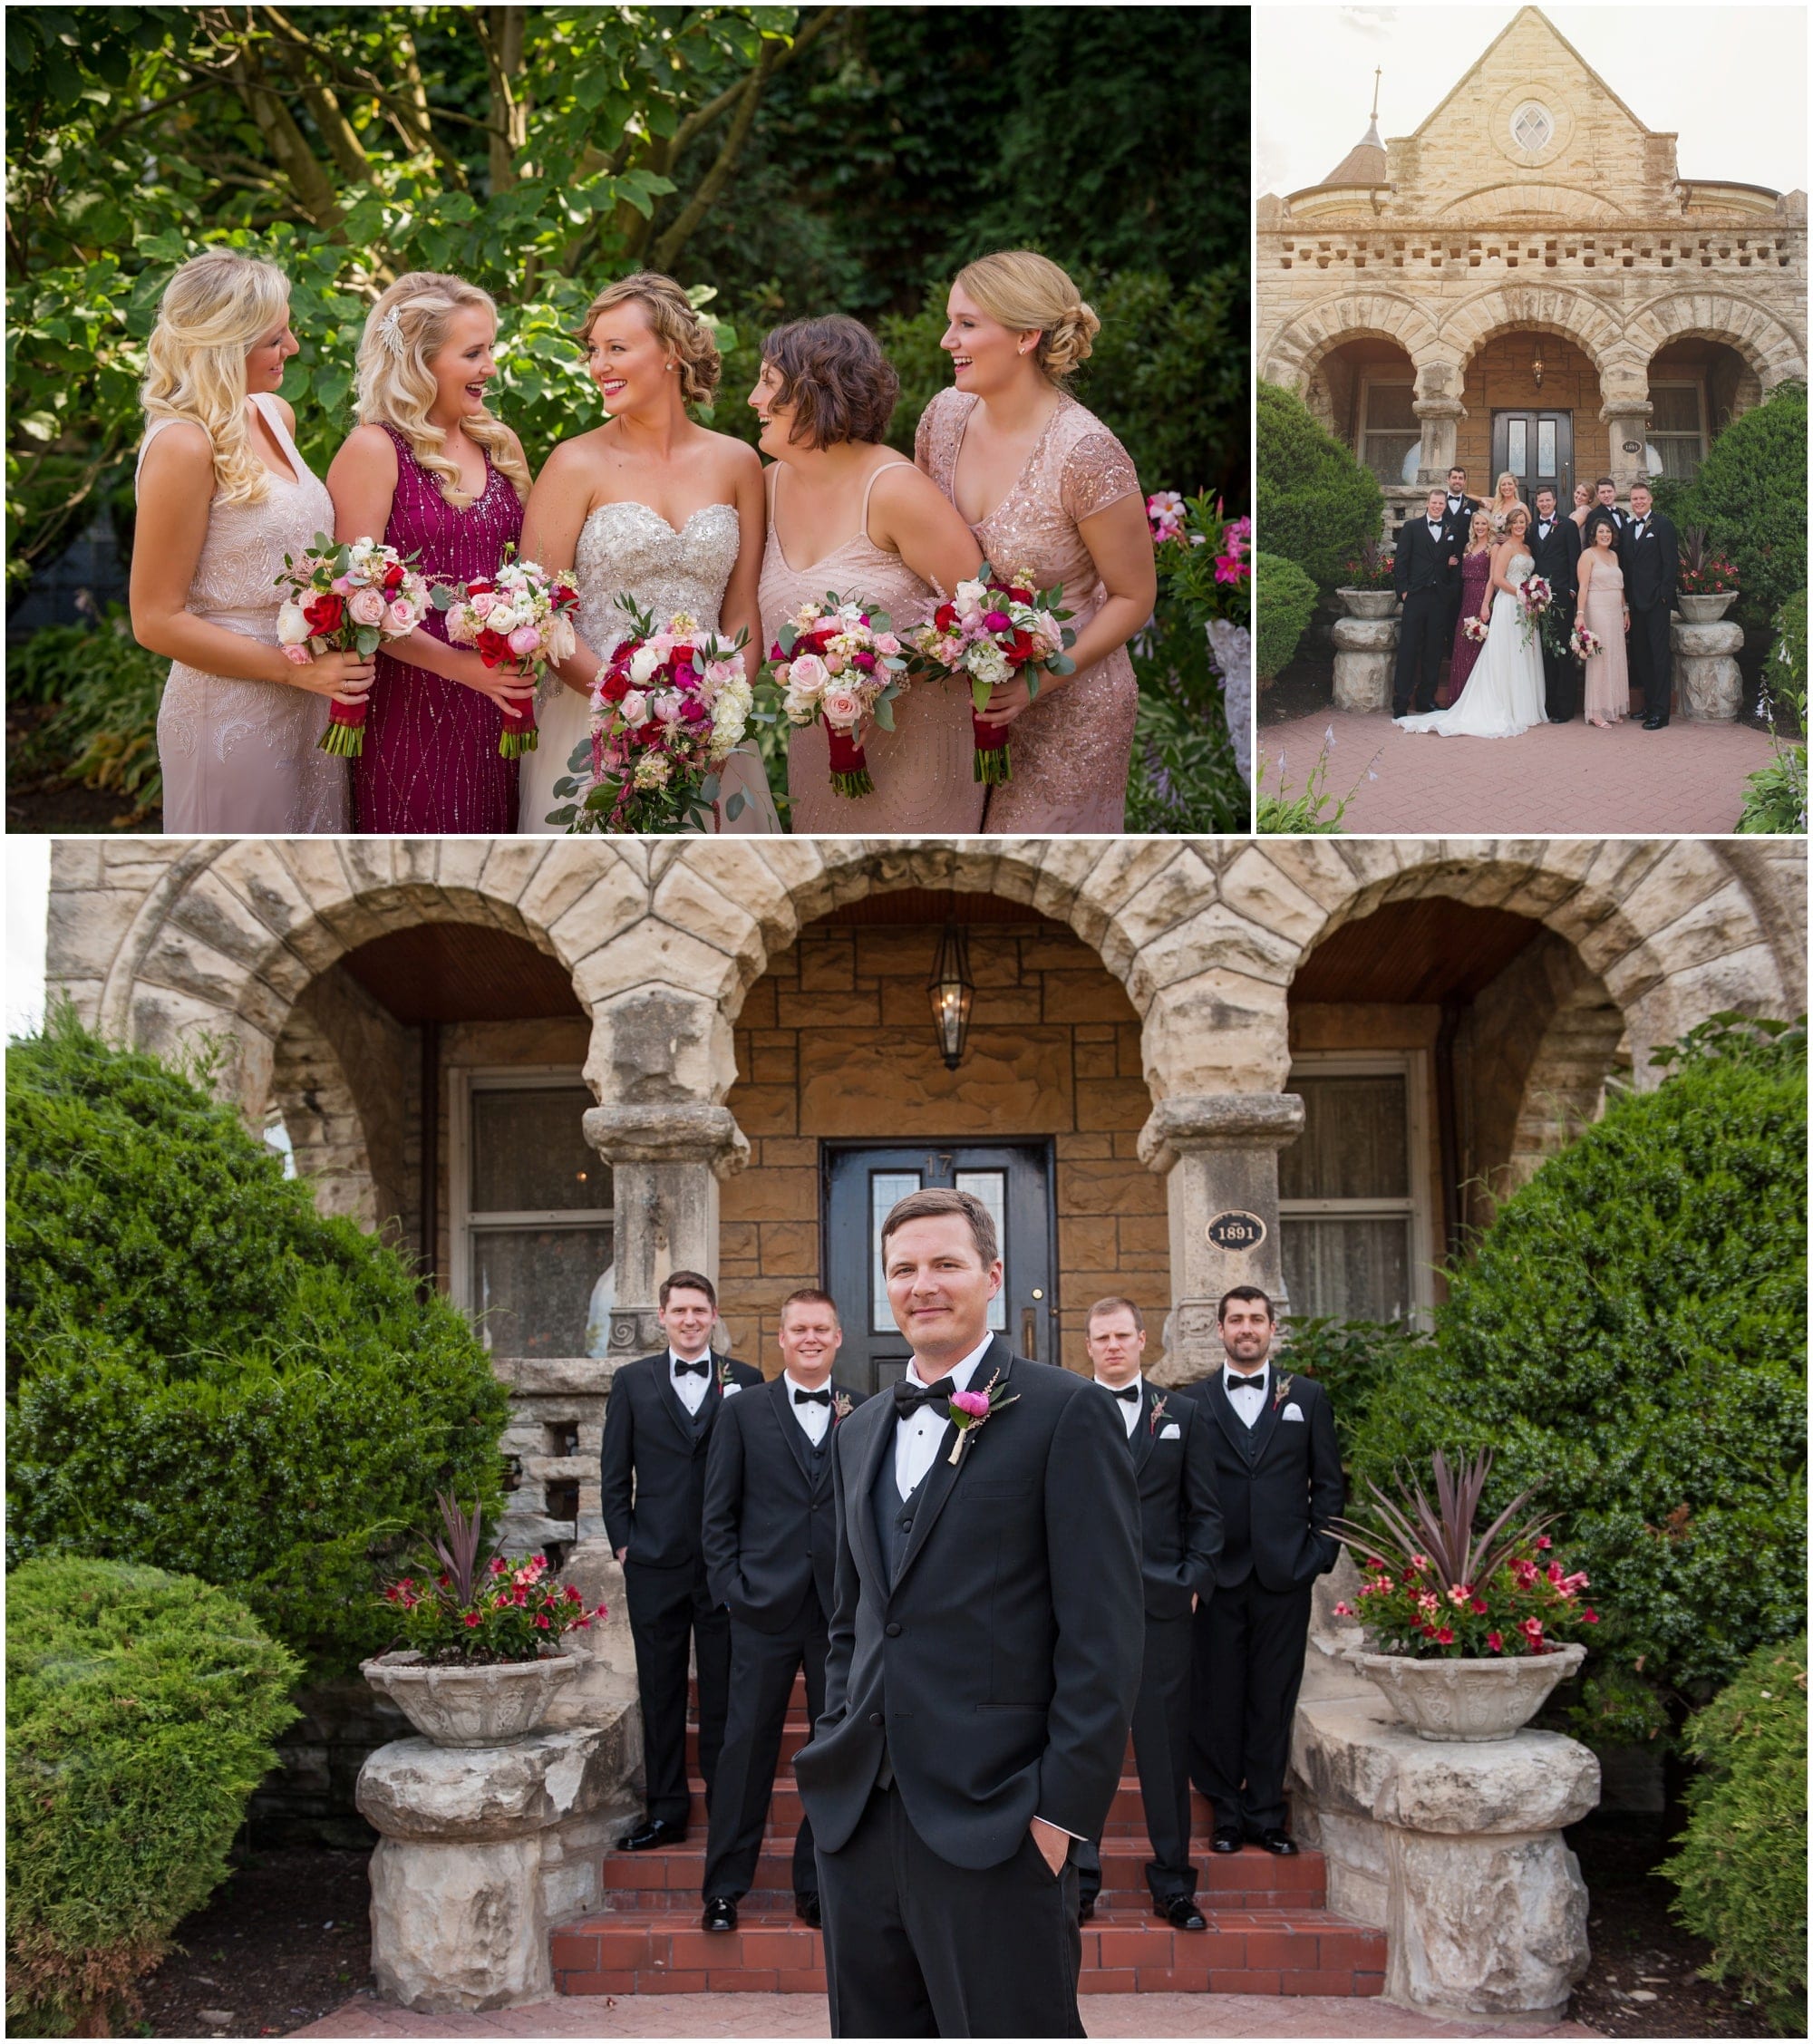 Fun bridal party pictures around the grounds of Patrick Haley Mansion